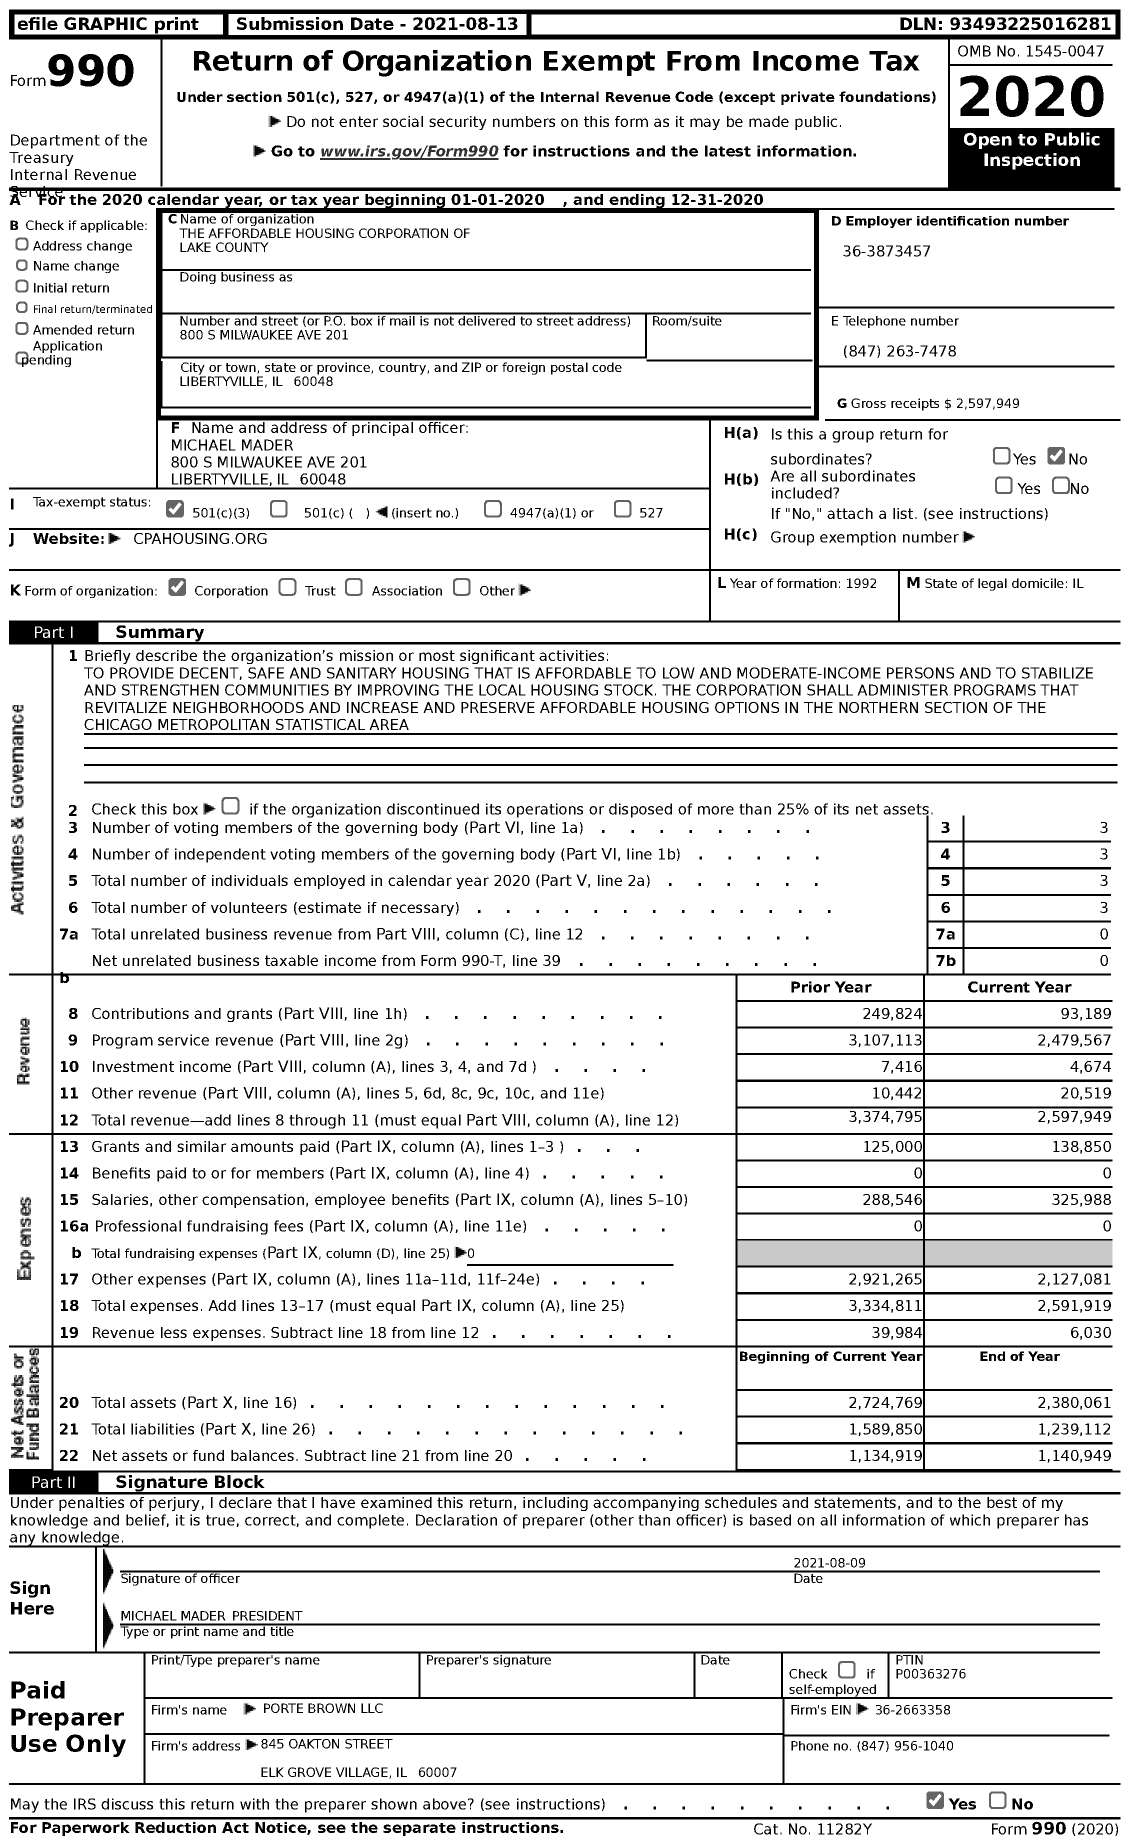 Image of first page of 2020 Form 990 for Affordable Housing Corporation of Lake County (AHC)